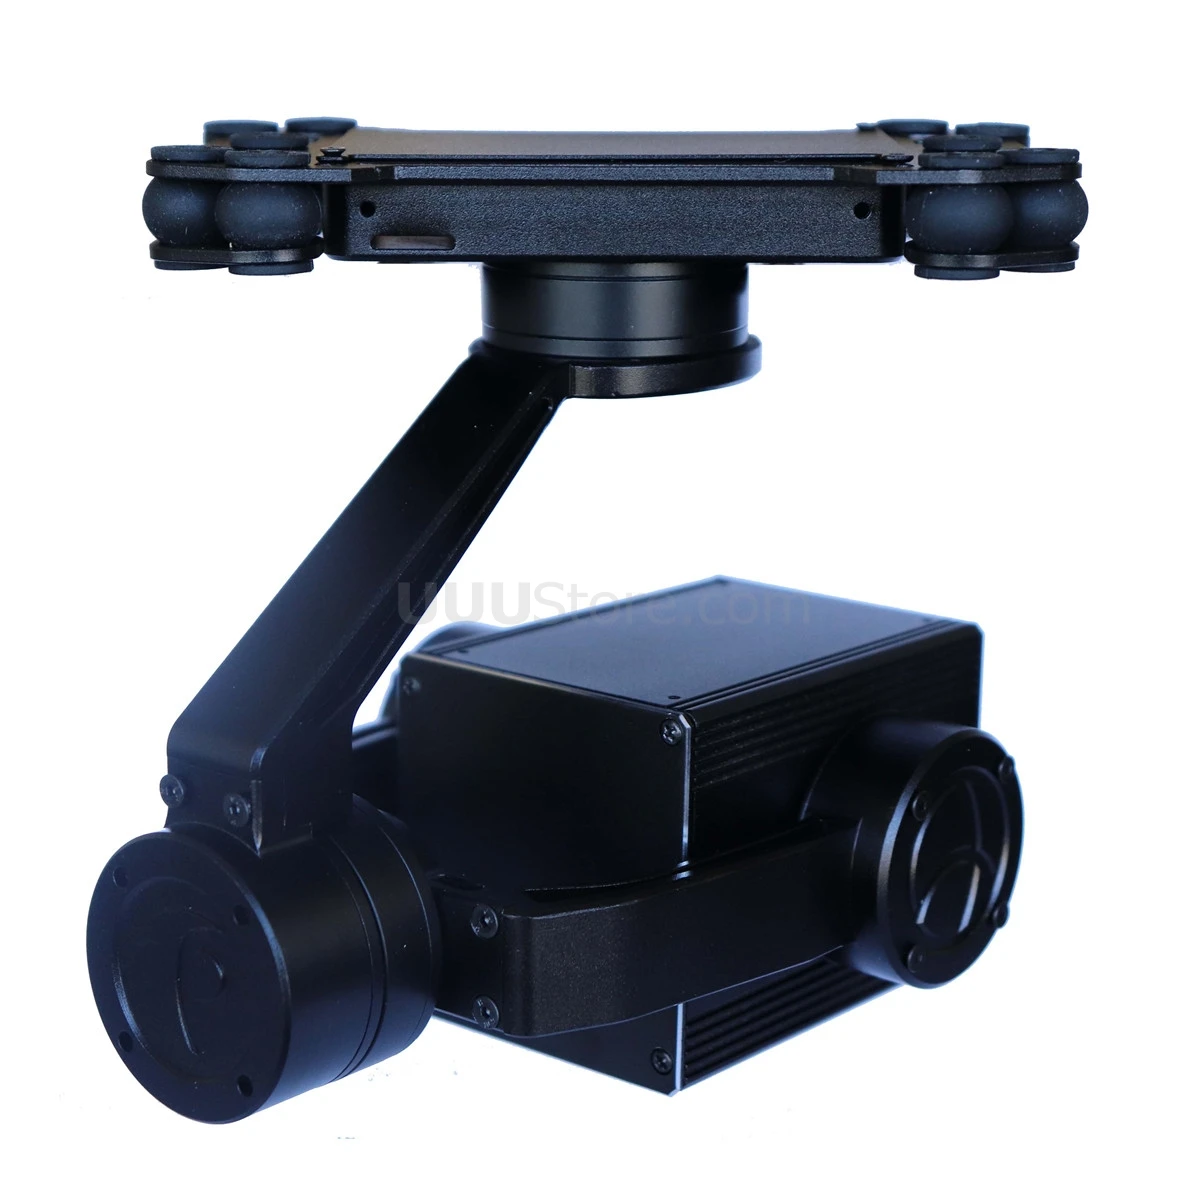 5-30KM long-distance 18X Dual Sensor of Zoom UAV Thermal Imaging Camera with 3 Axis Gimbal for UAV Drone Aerial Cinematography 5